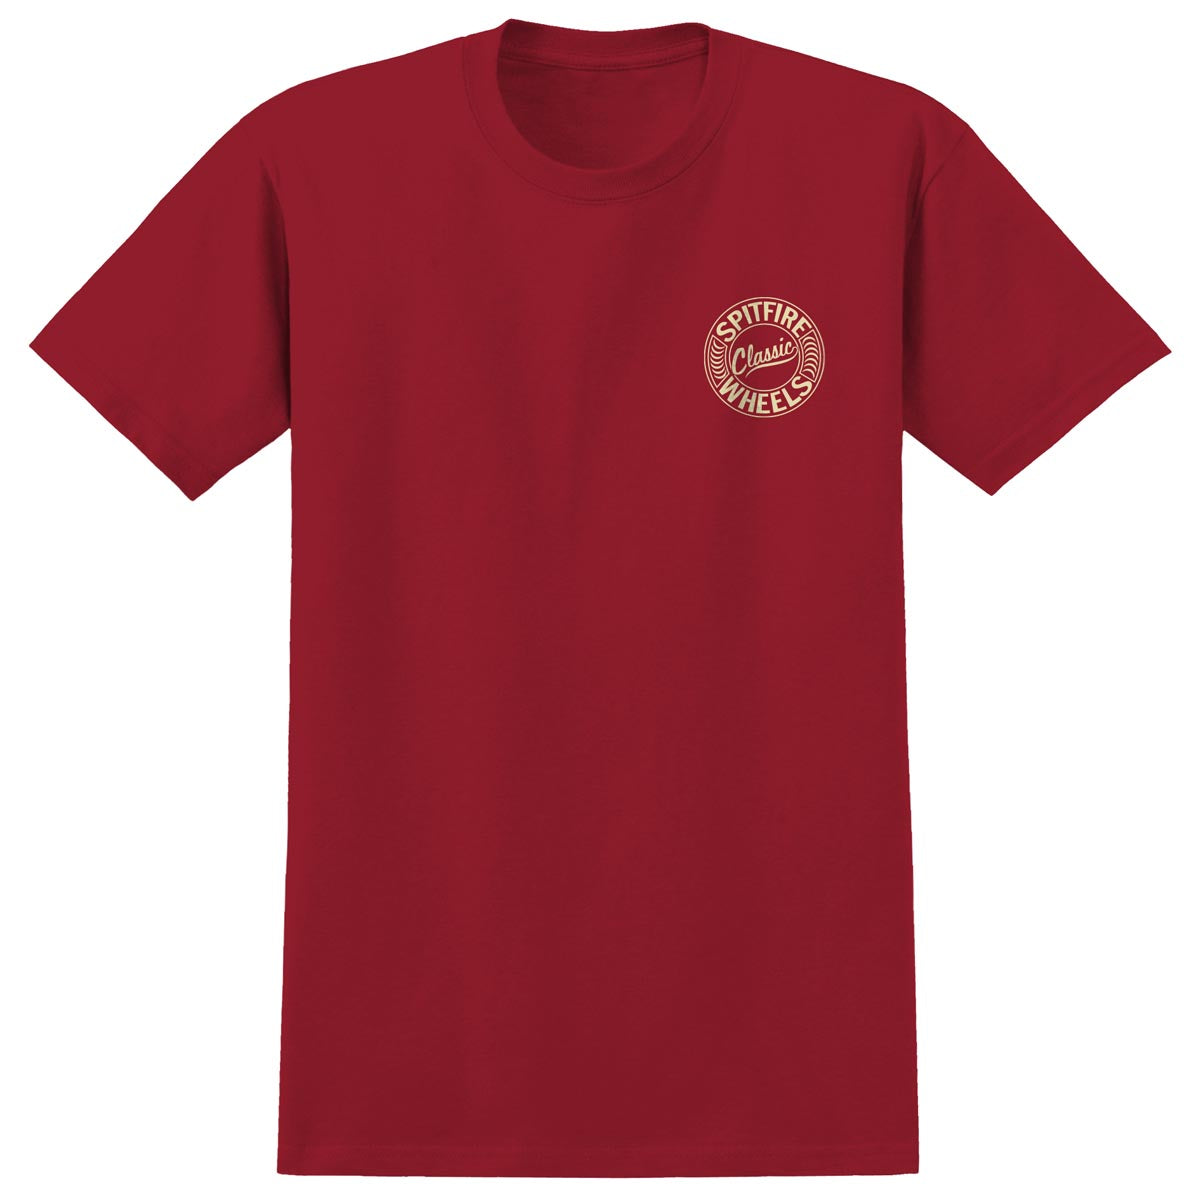 Spitfire Flying Classic T-Shirt - Maroon image 2